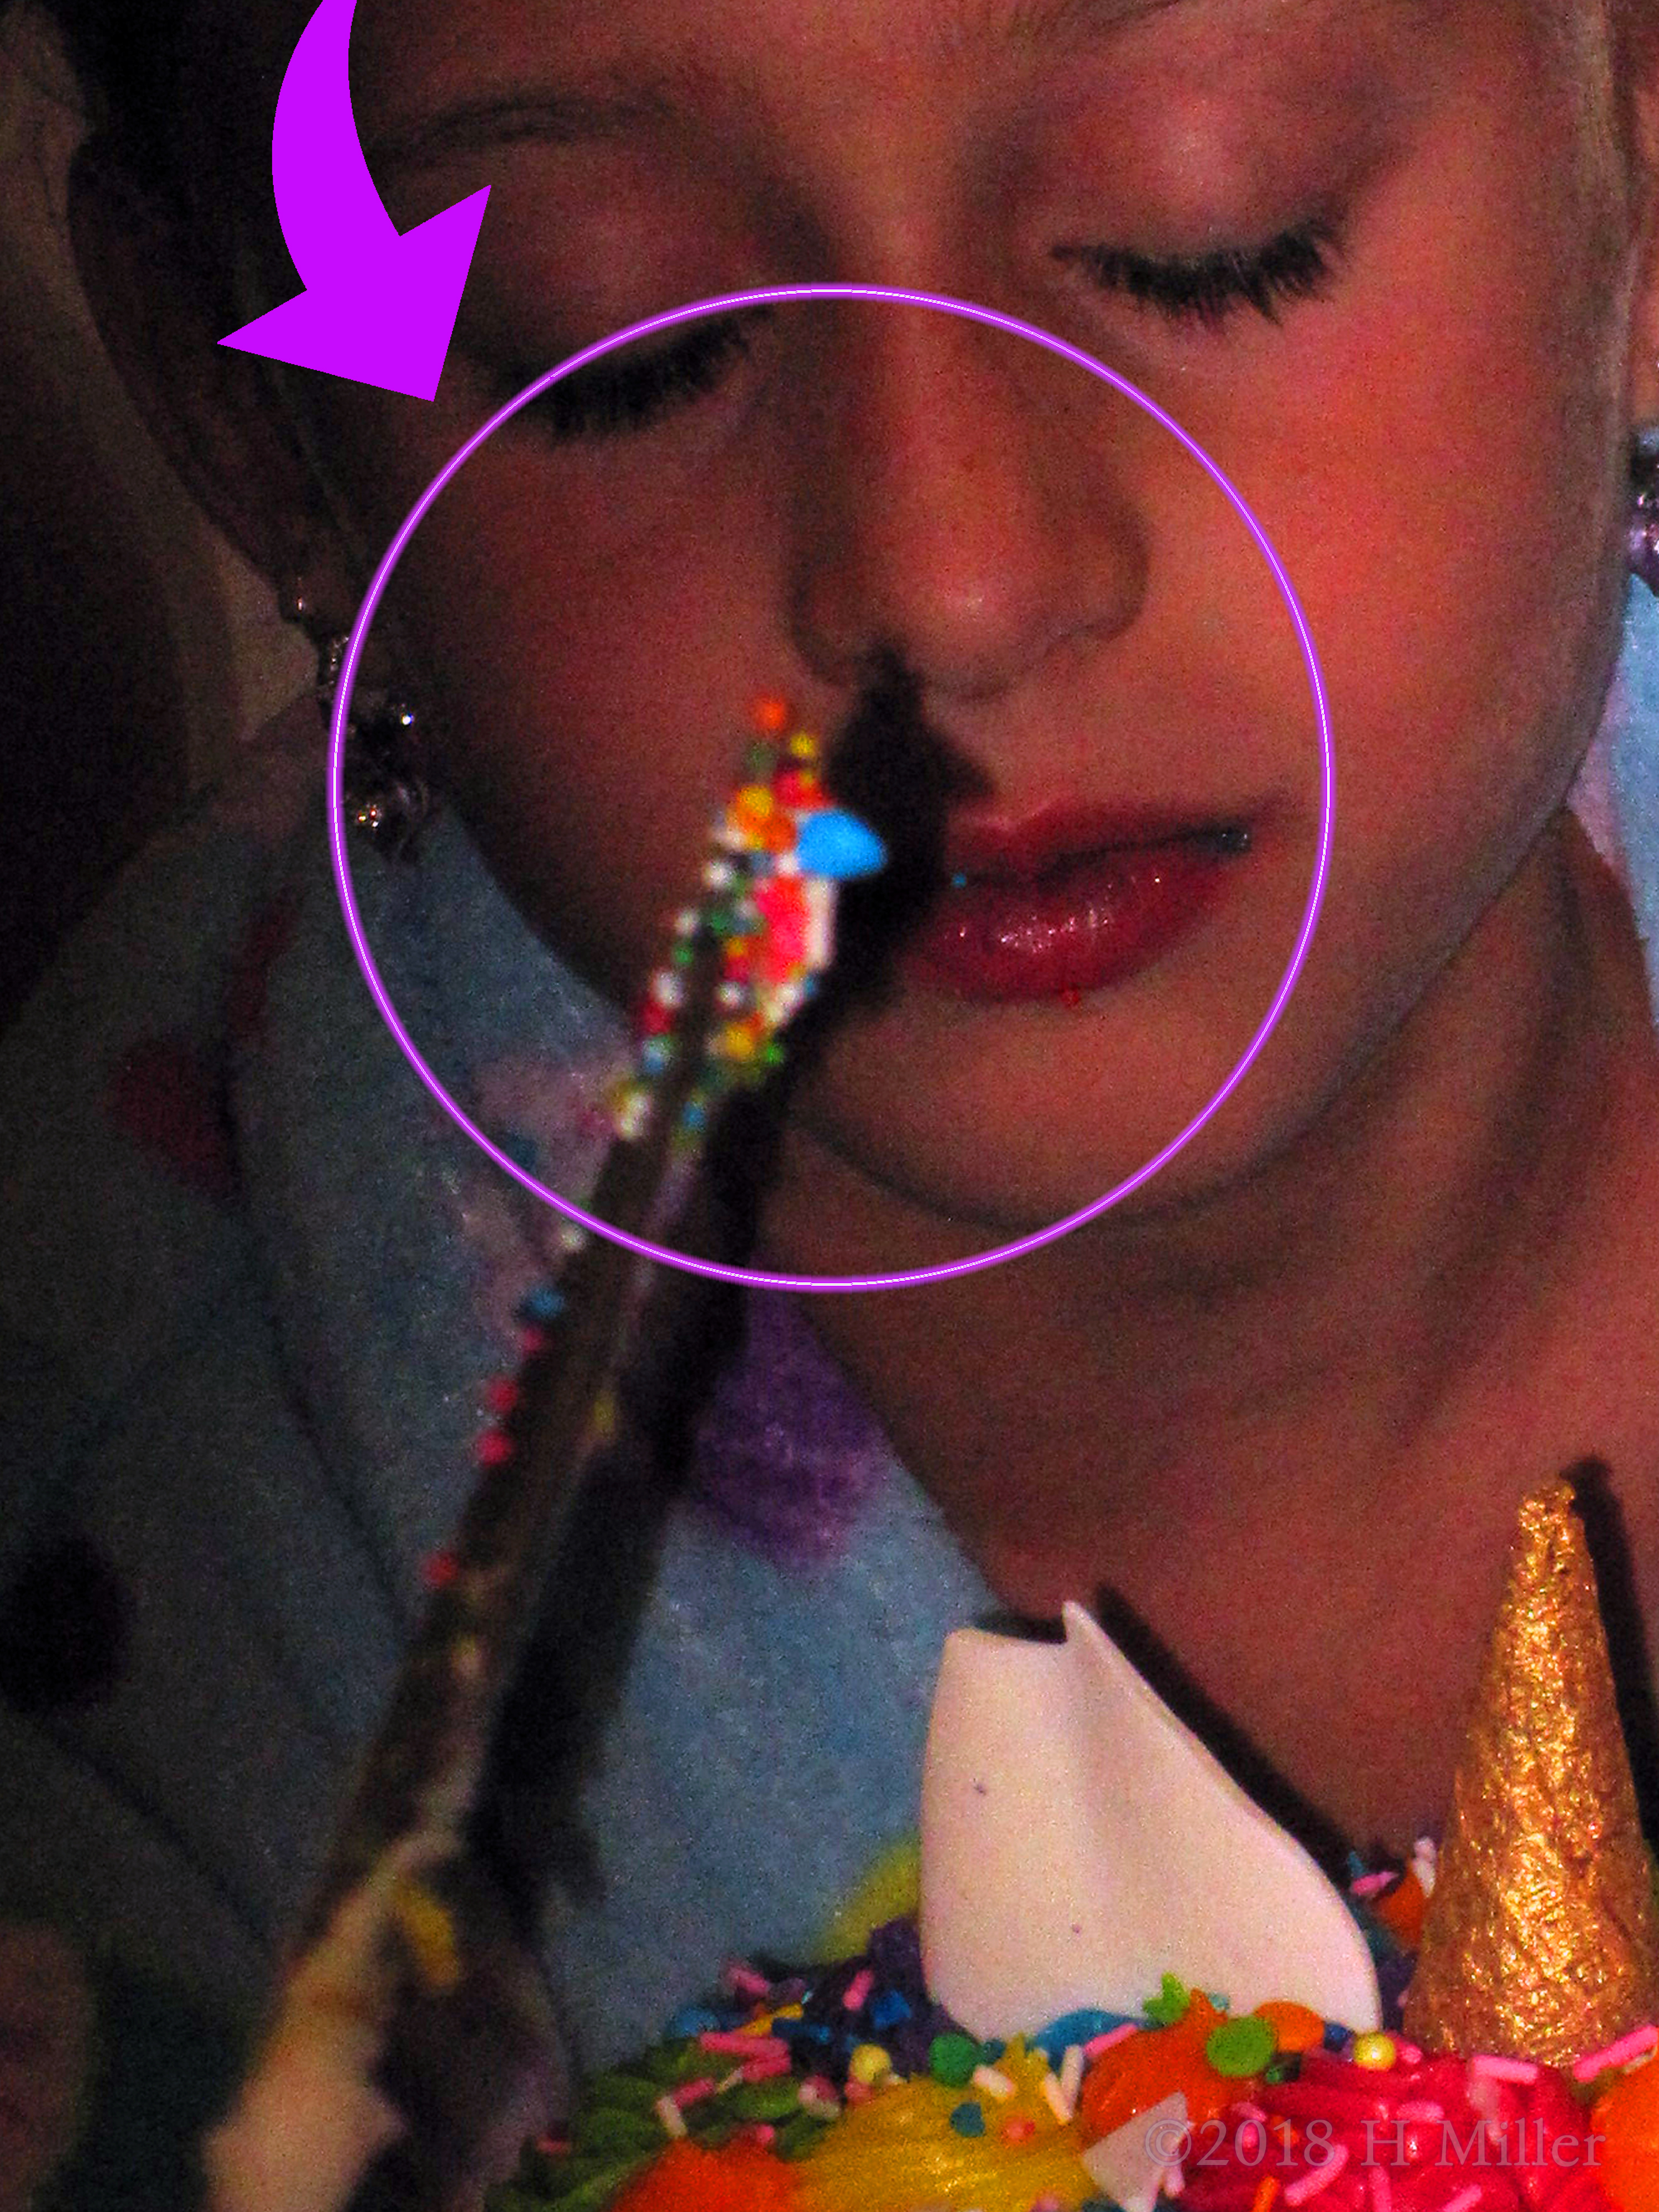 A Closeup Of The Unicorn Shadow On The Birthday Girl's Face! Unicorns Love Her Too! 